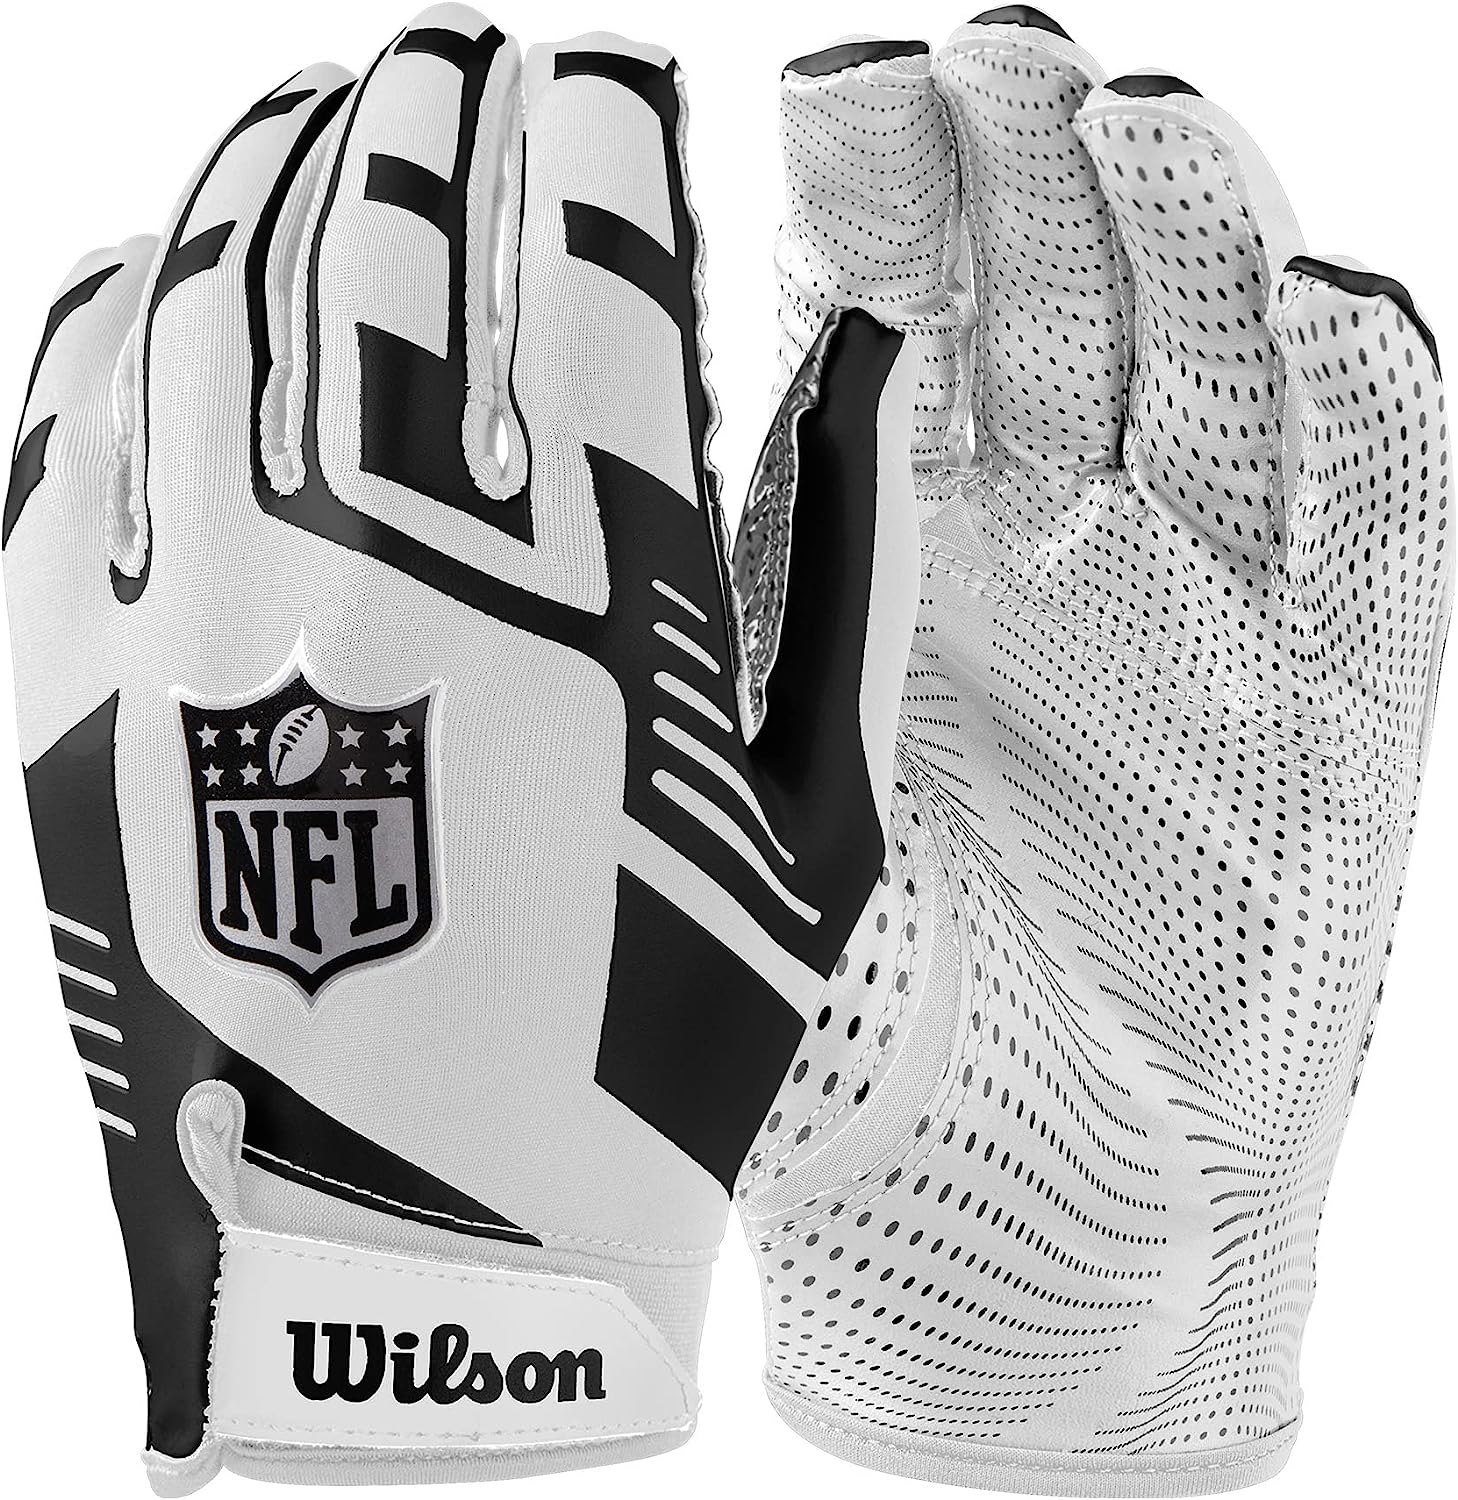 Wilson NFL Stretch Fit Receivers Glove - Adult Size, White/Black, 2 Pack